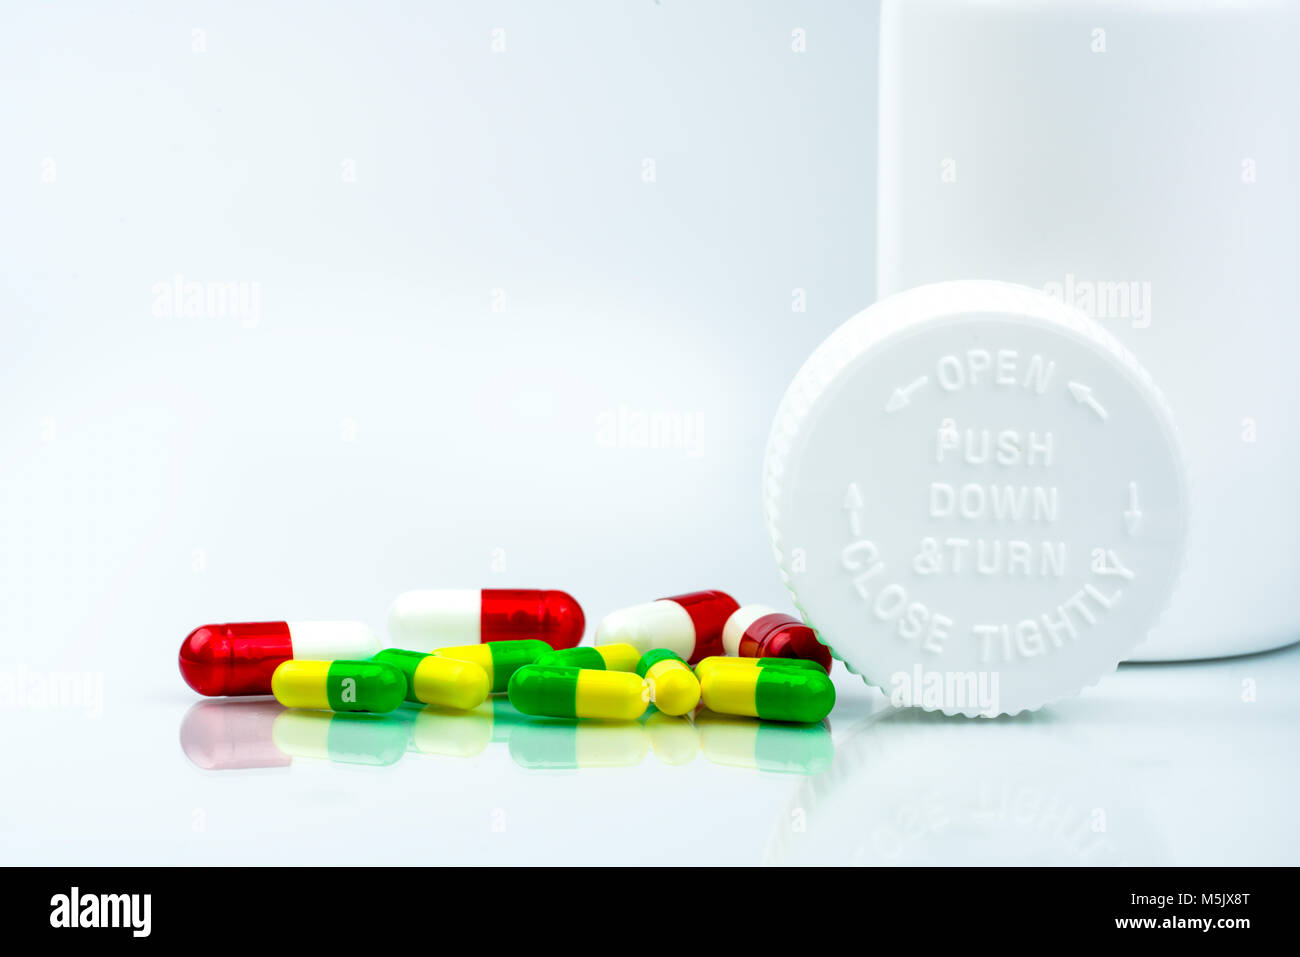 https://c8.alamy.com/comp/M5JX8T/colorful-pills-on-white-background-and-plastic-bottle-with-blank-label-M5JX8T.jpg